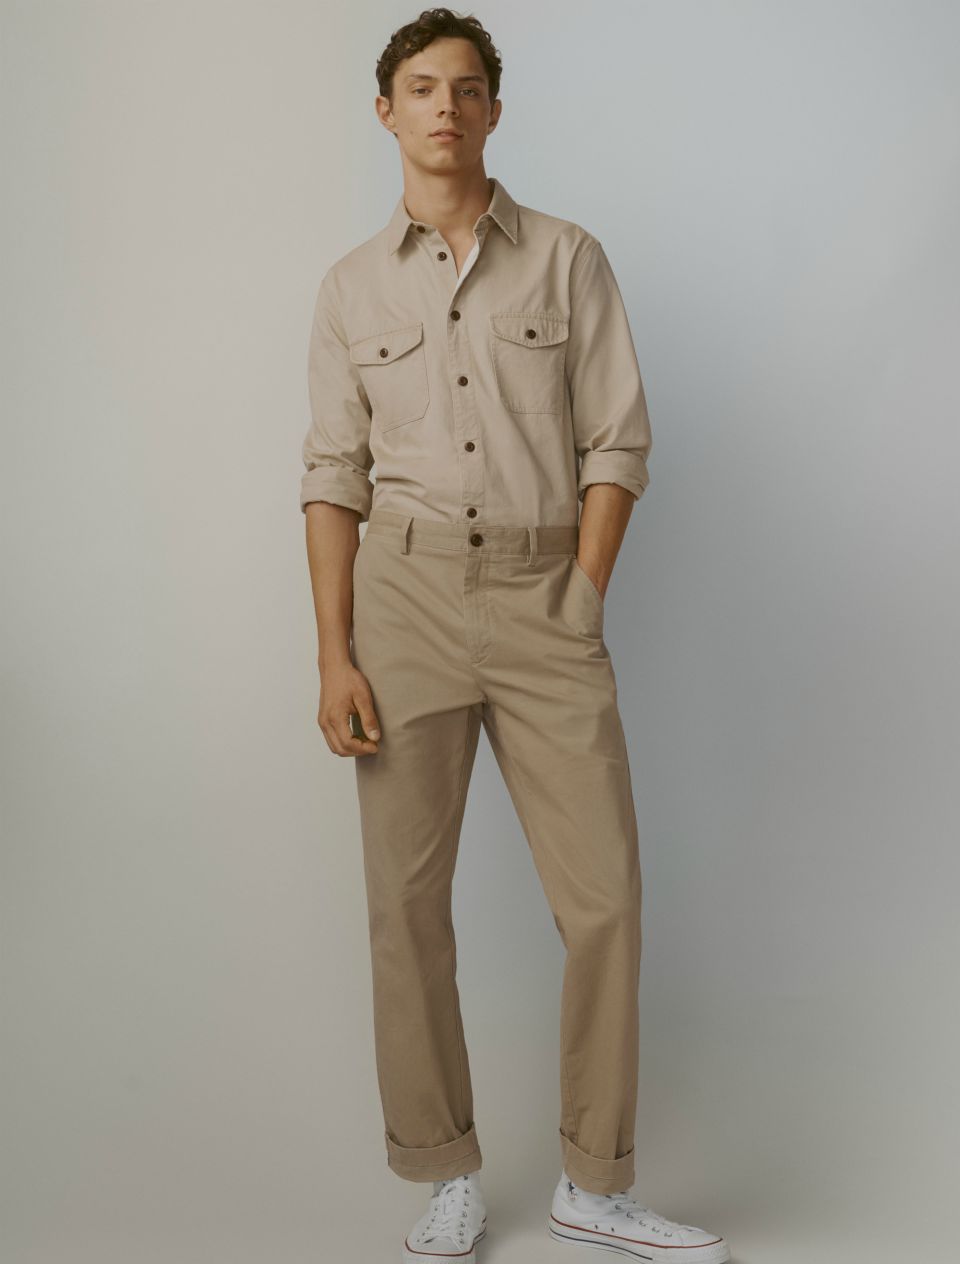 Model in beige chore shirt and beige trousers